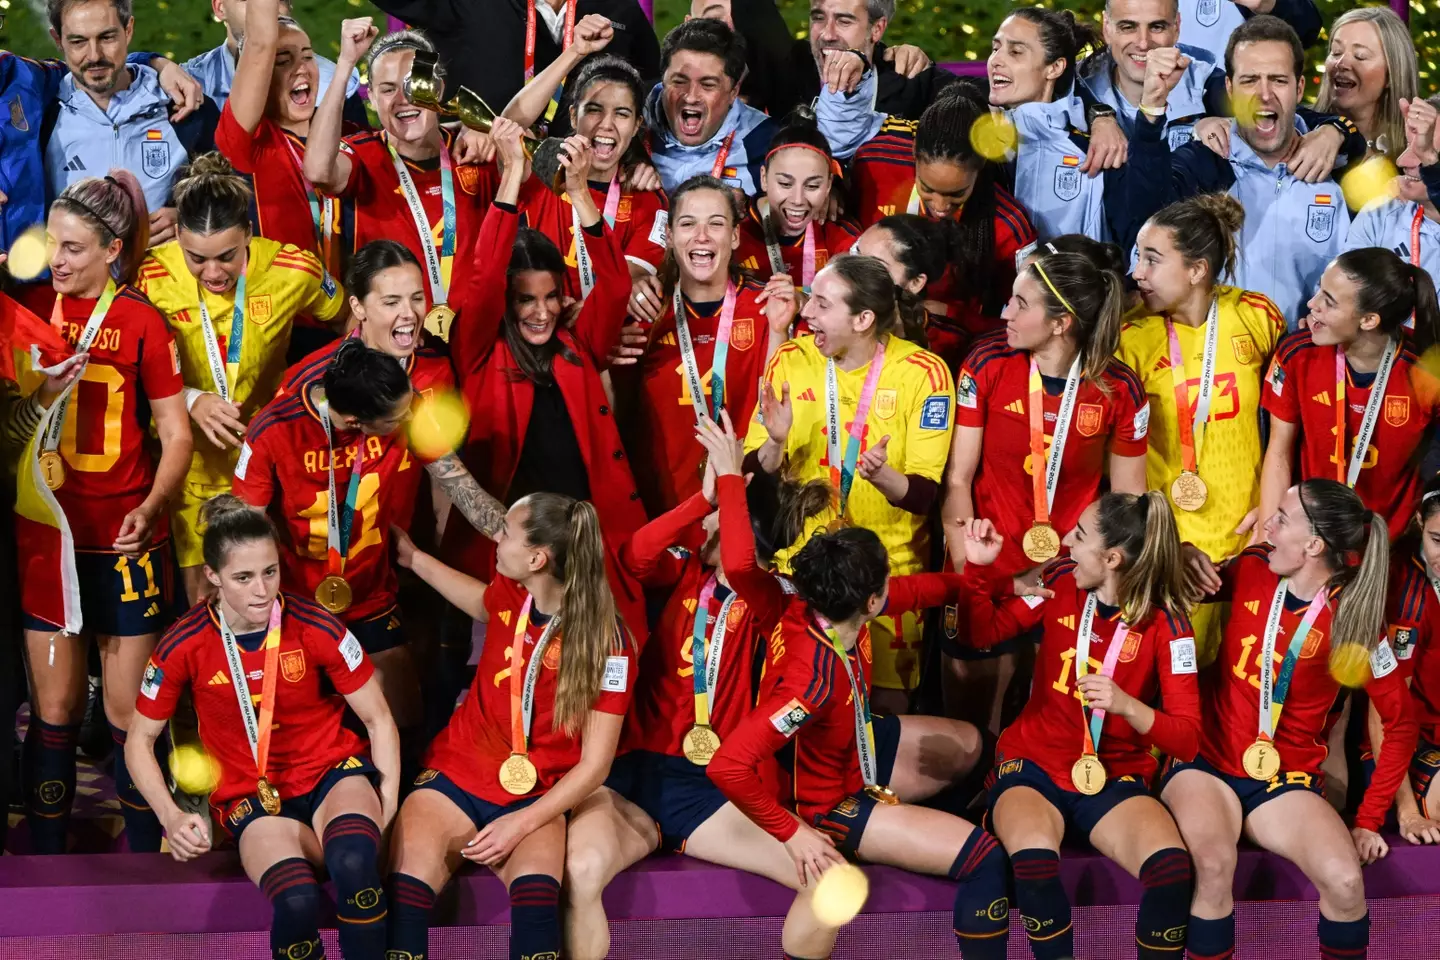 Spain won 1-0 over England in the women's World Cup final.